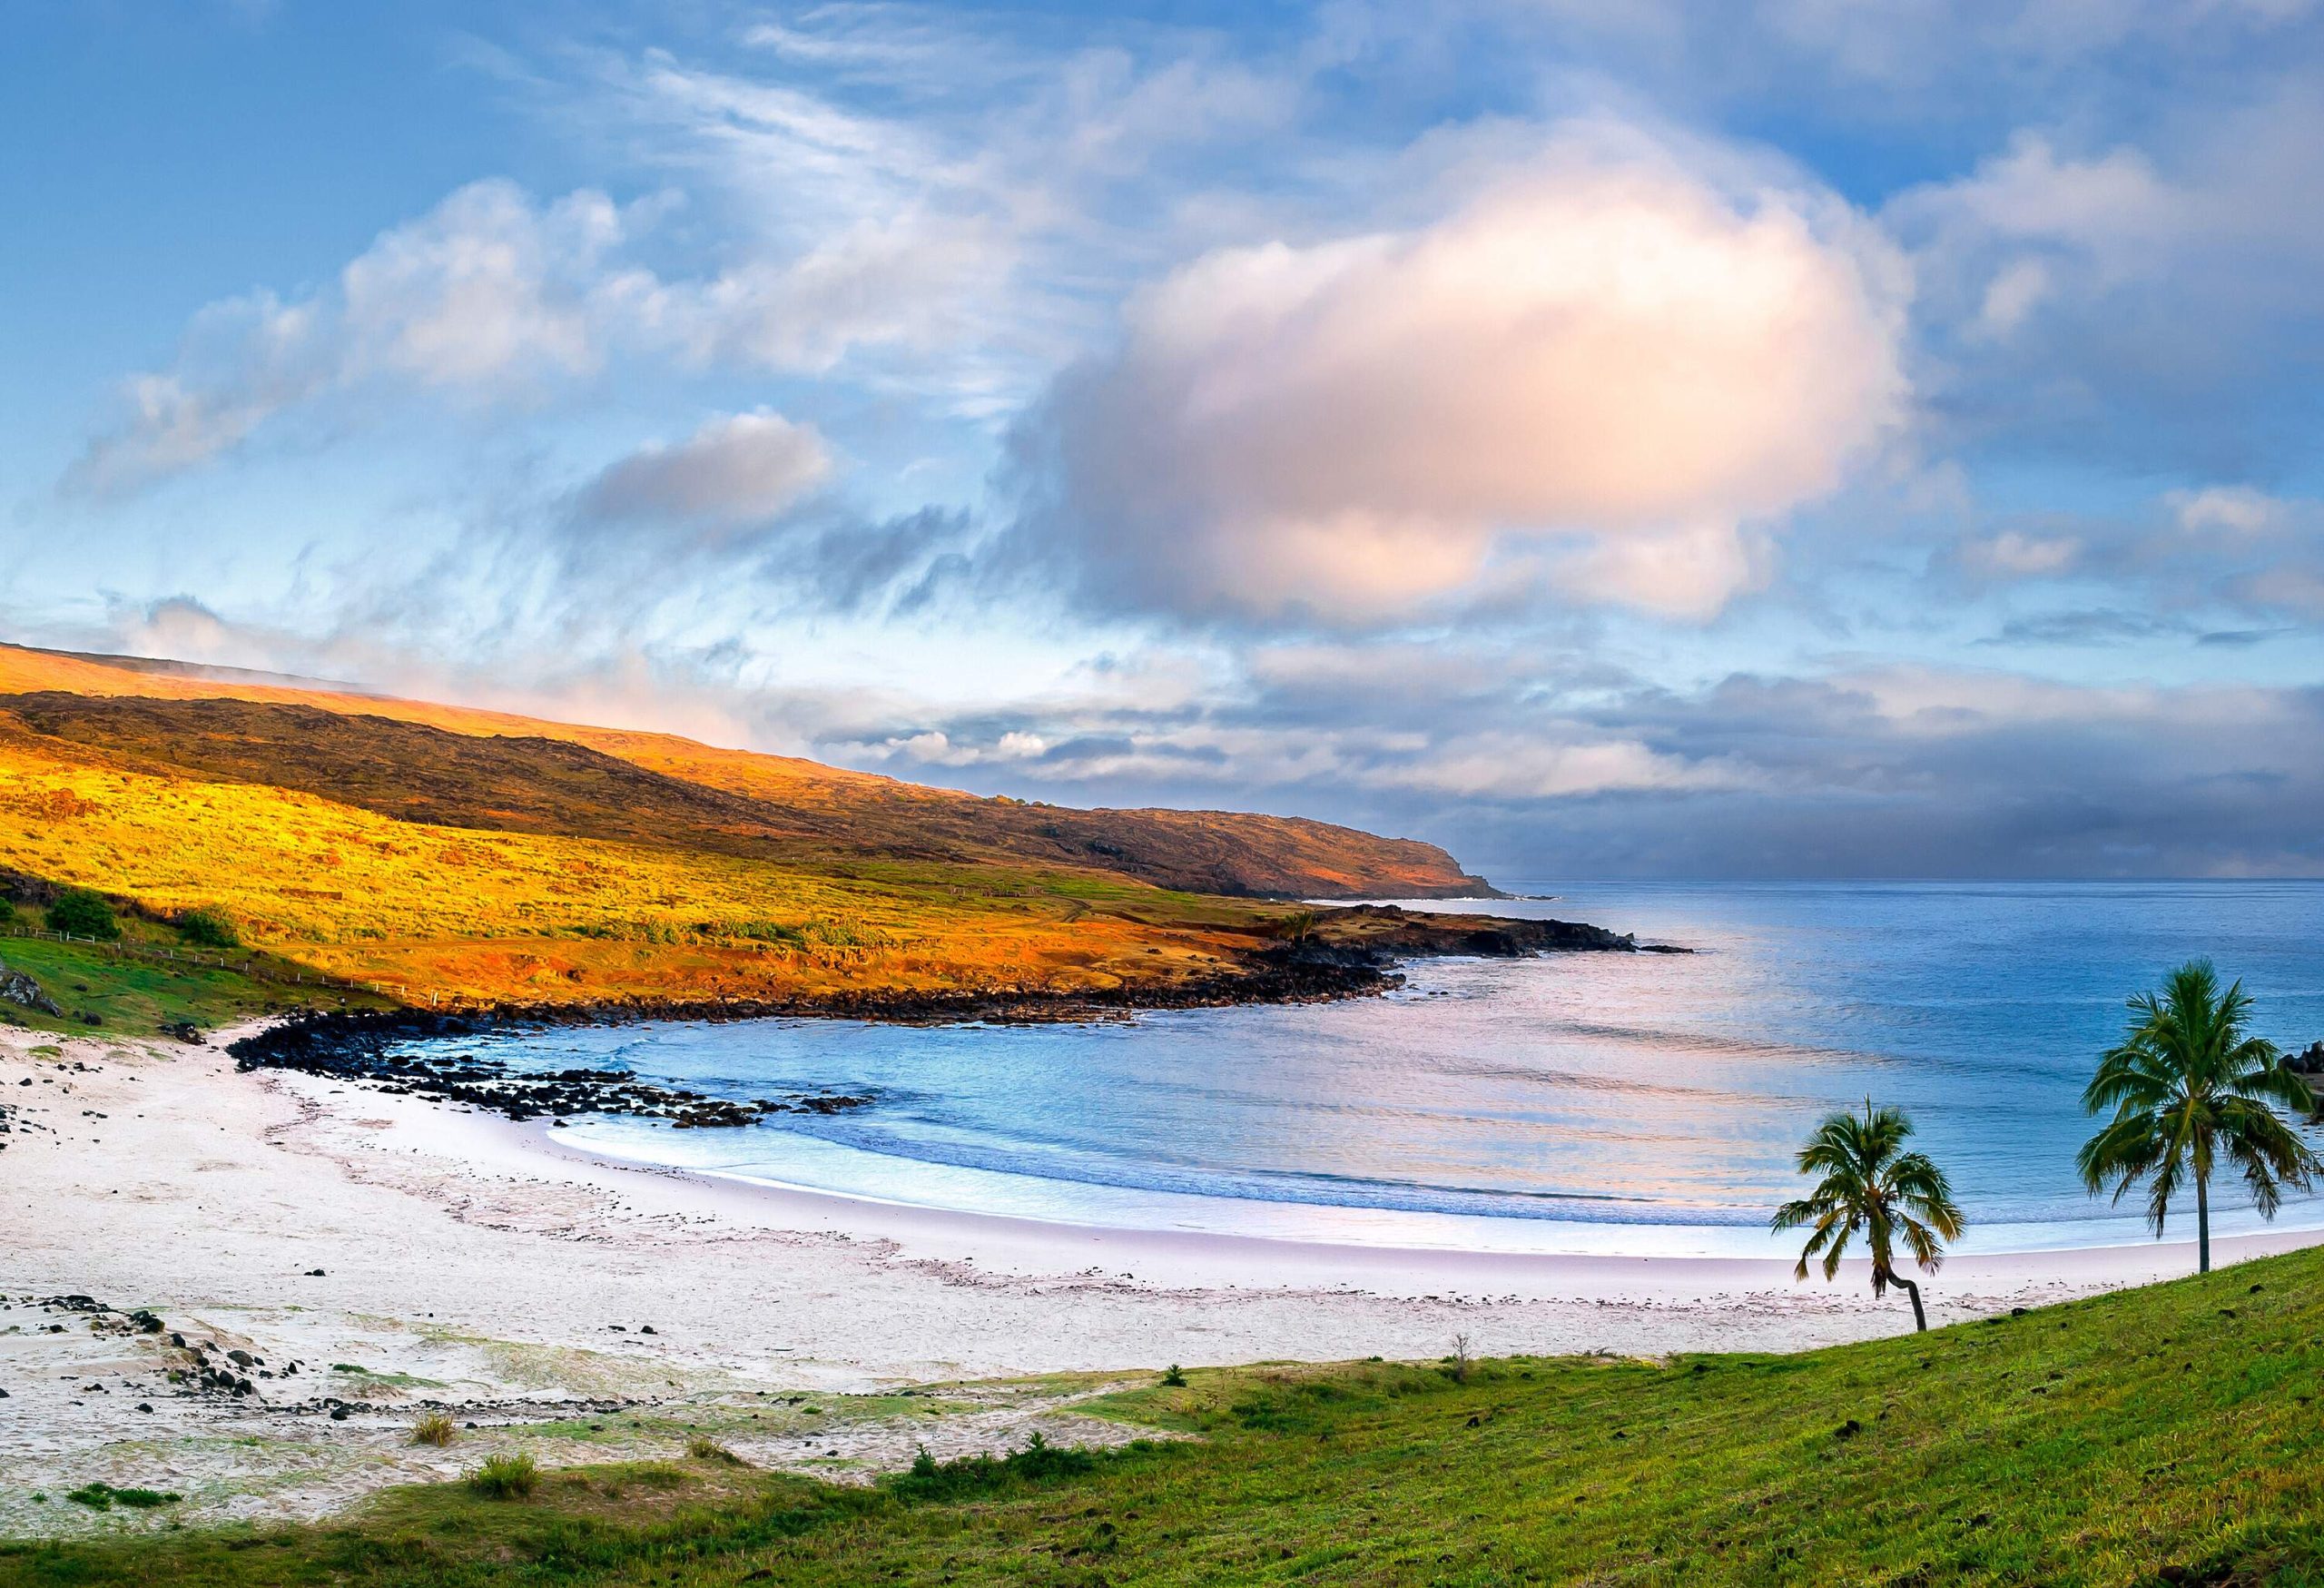 A white beach flanked by grassy lowlands, with the waves softly roll into the shore.